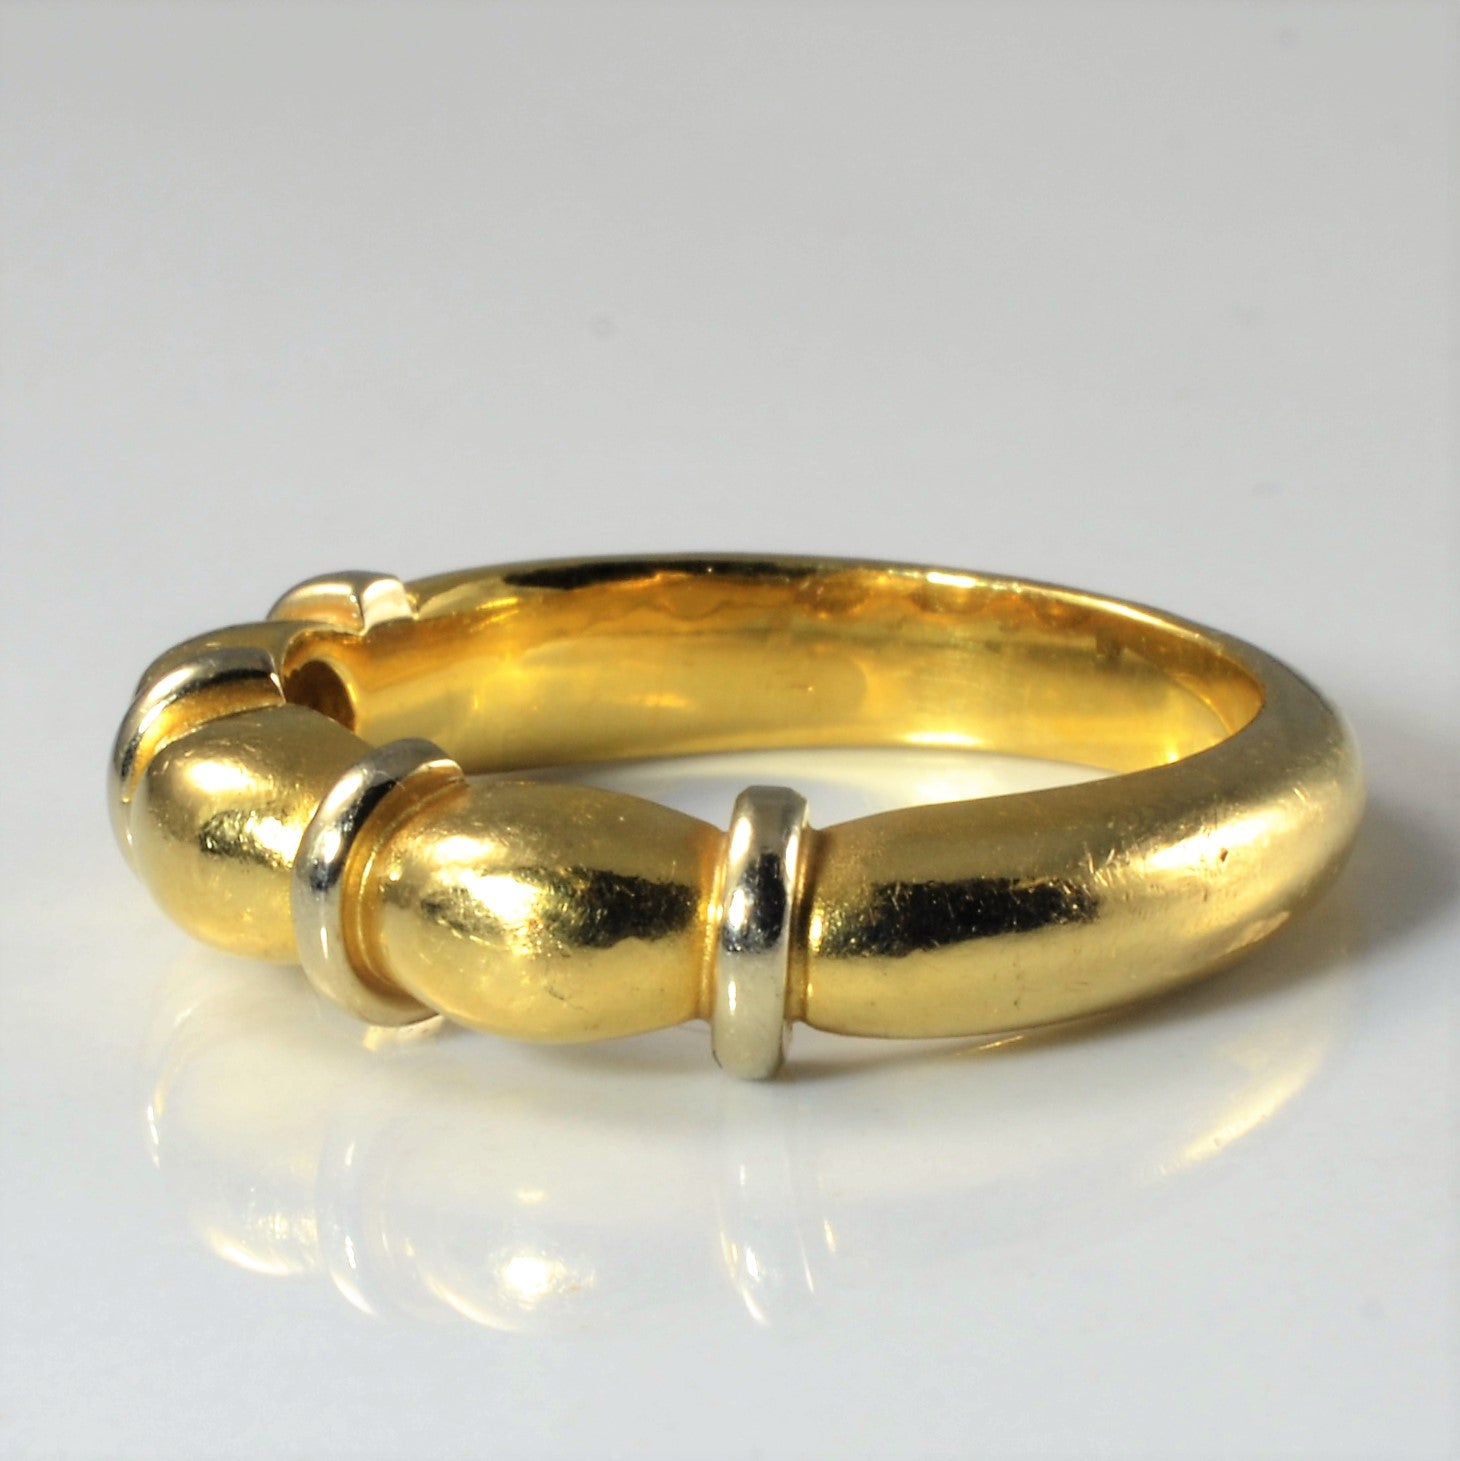 Textured Gold Ring | SZ 6.5 |